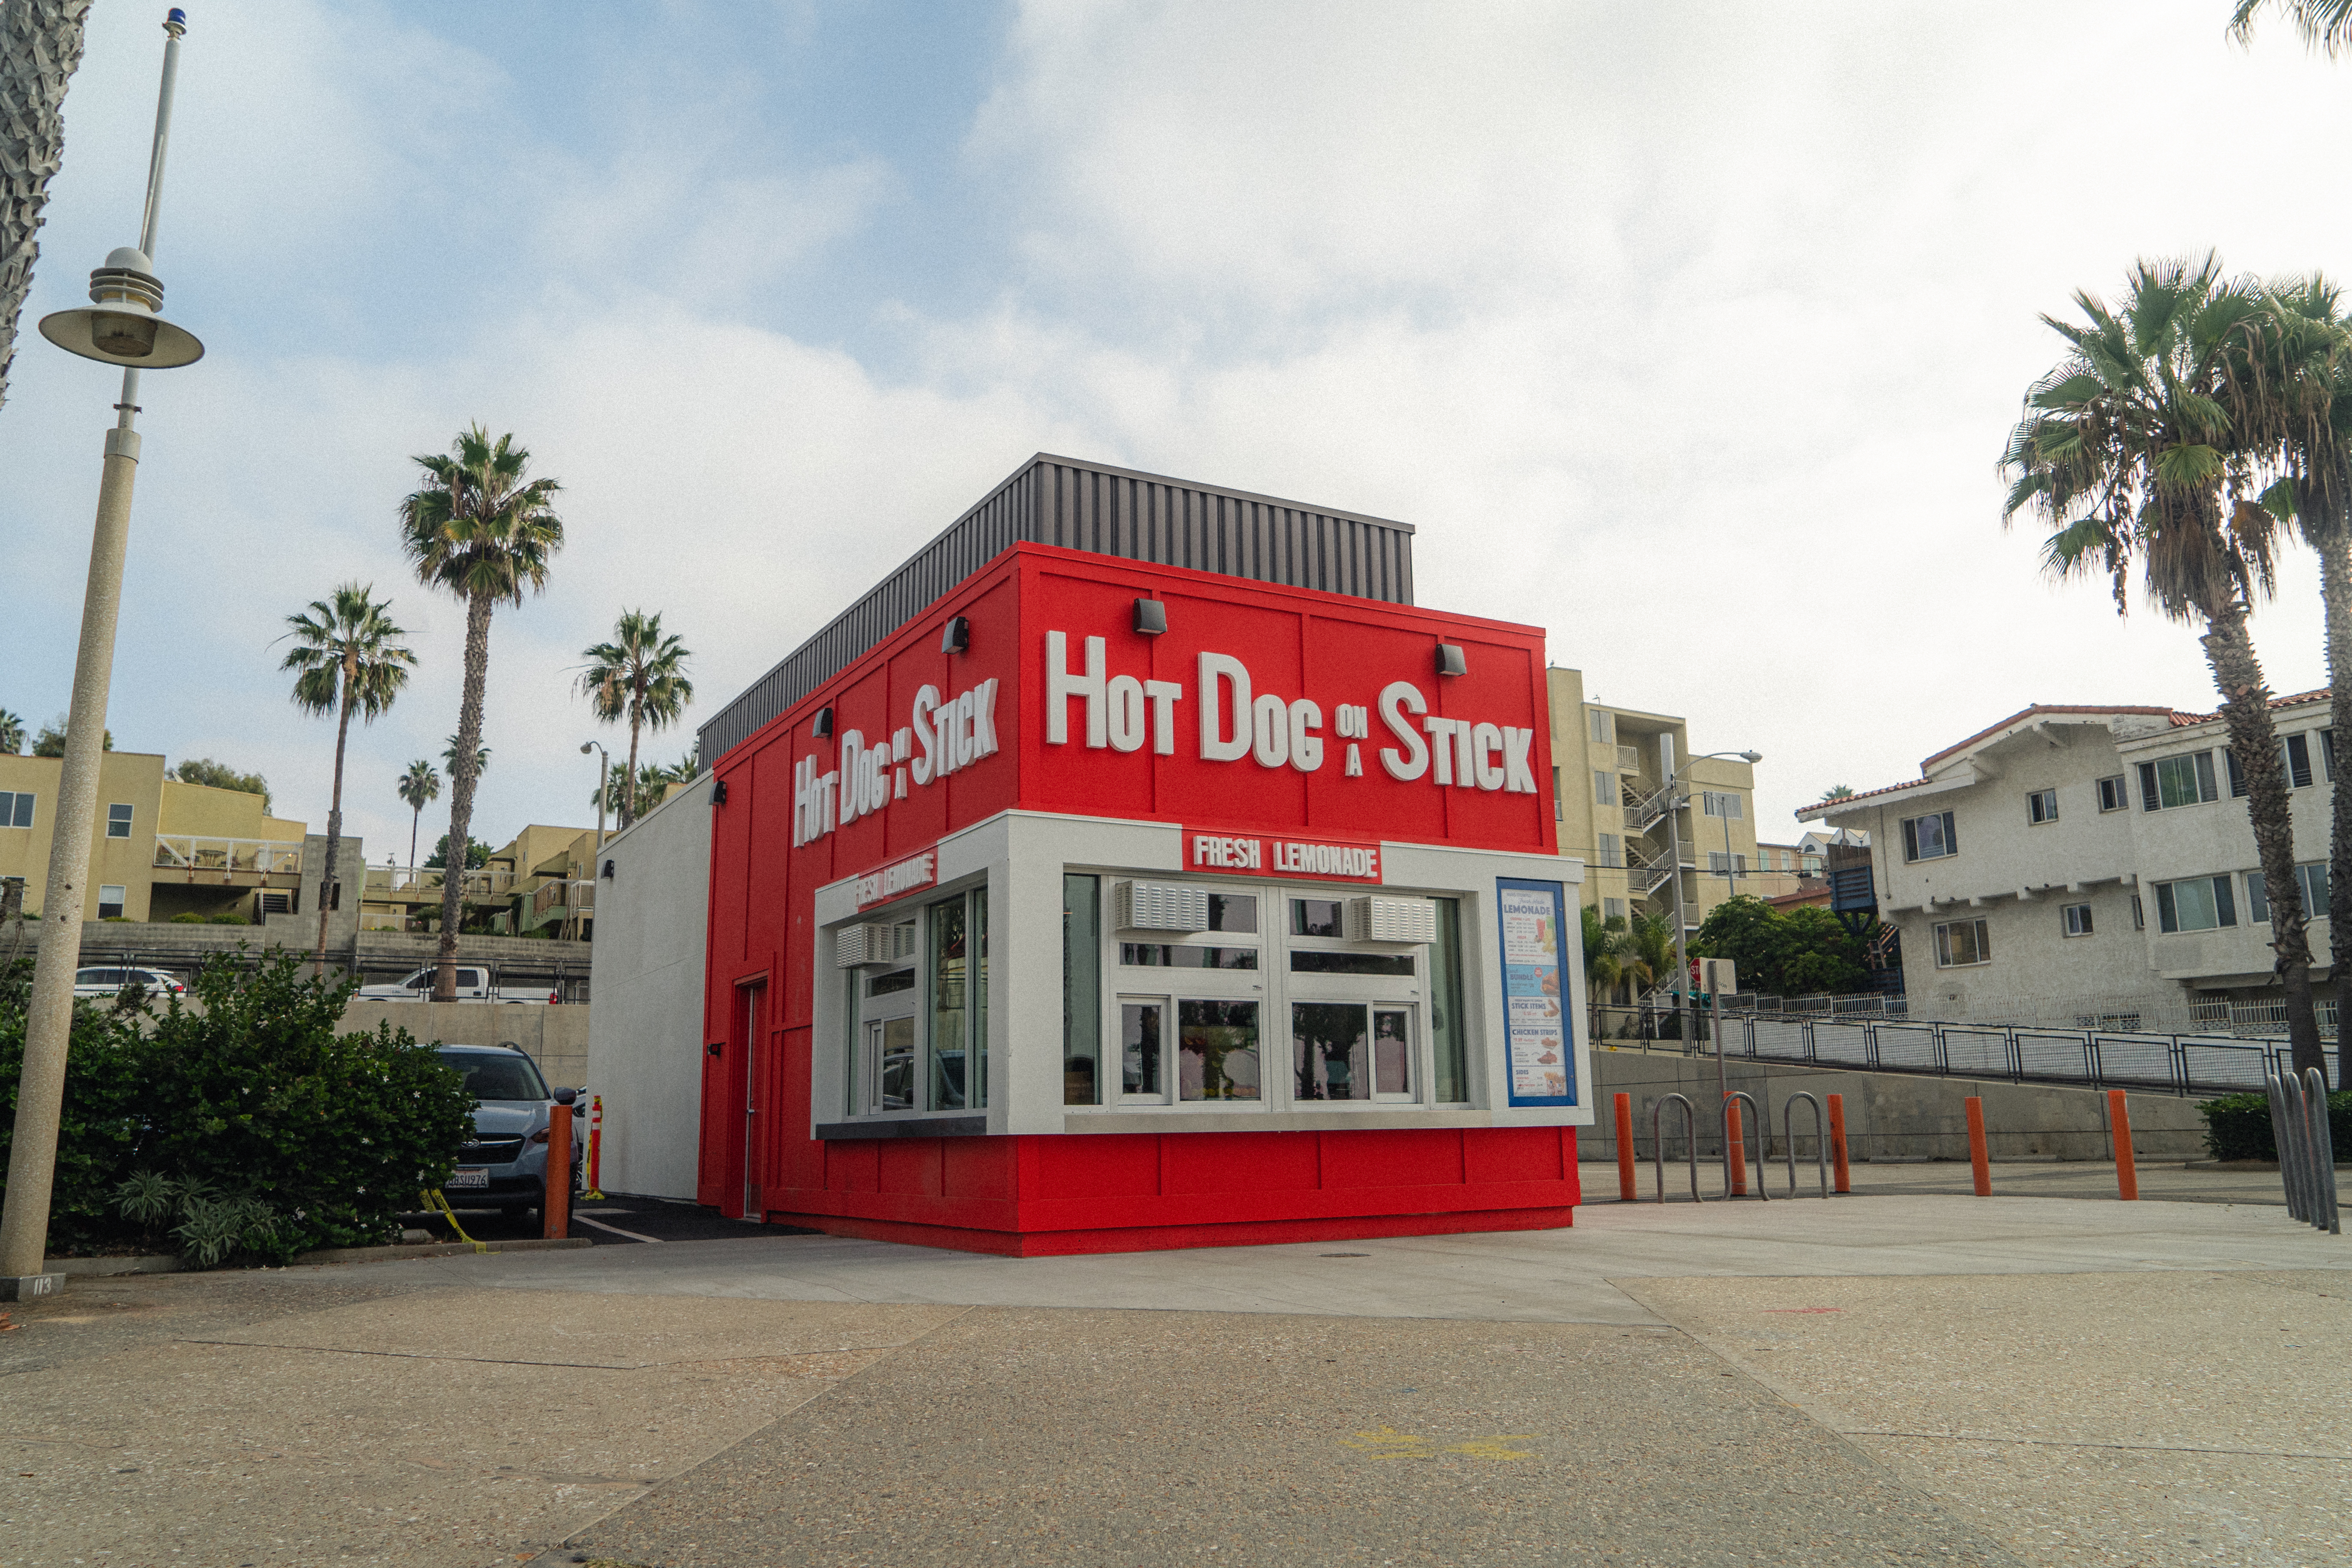 A red and white building for Hot Dog on a Stick in Santa Monica, California.